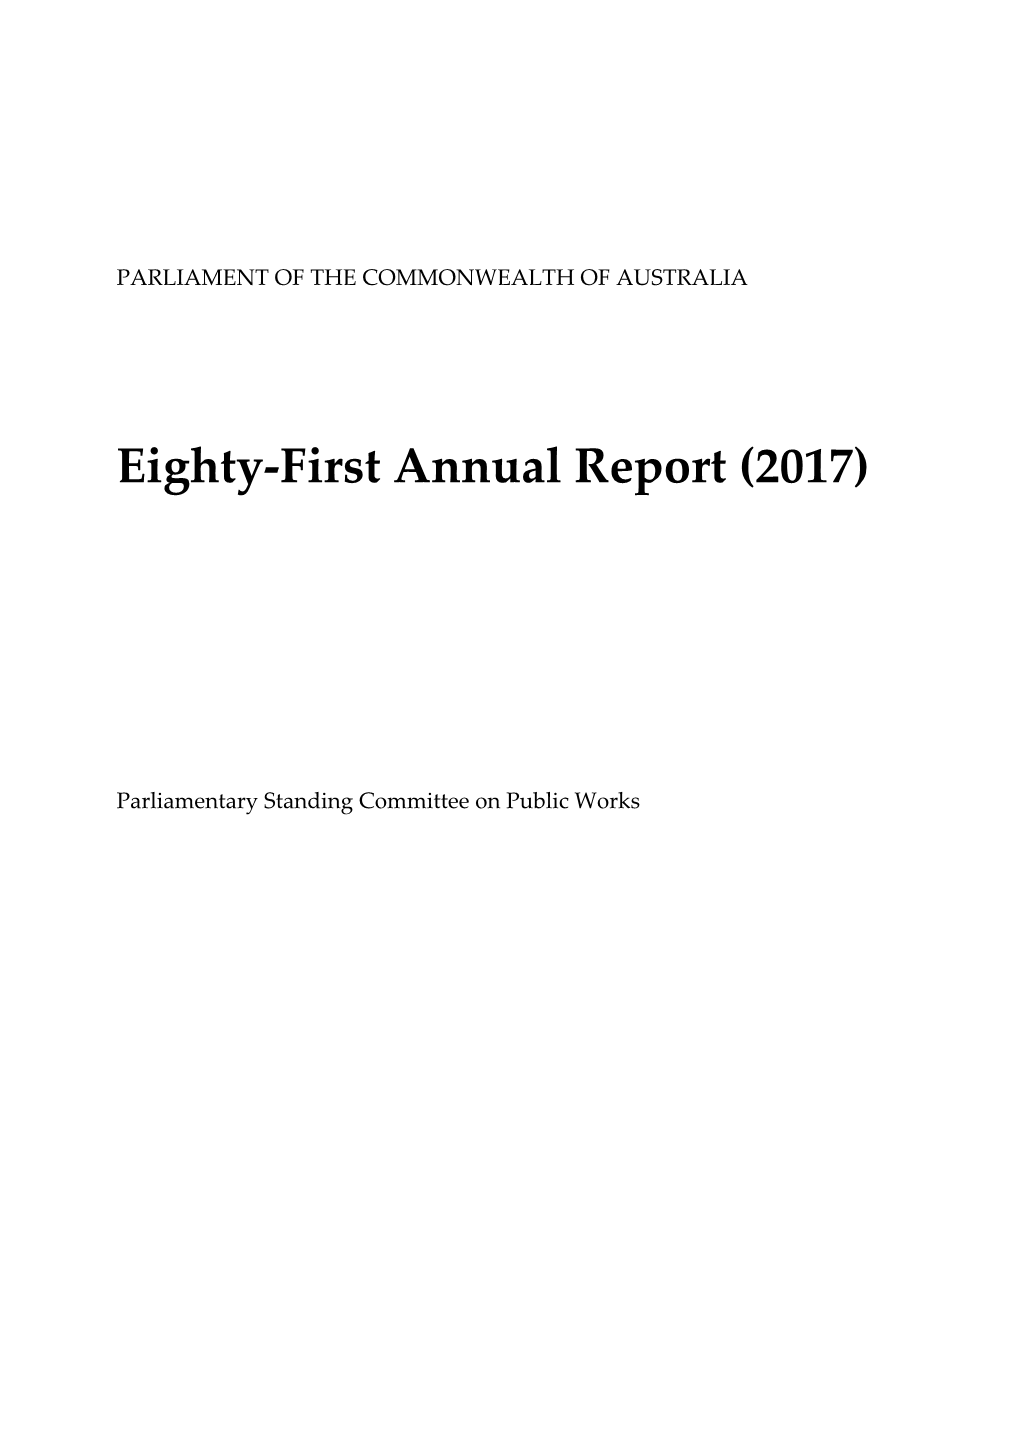 Eighty-First Annual Report (2017)